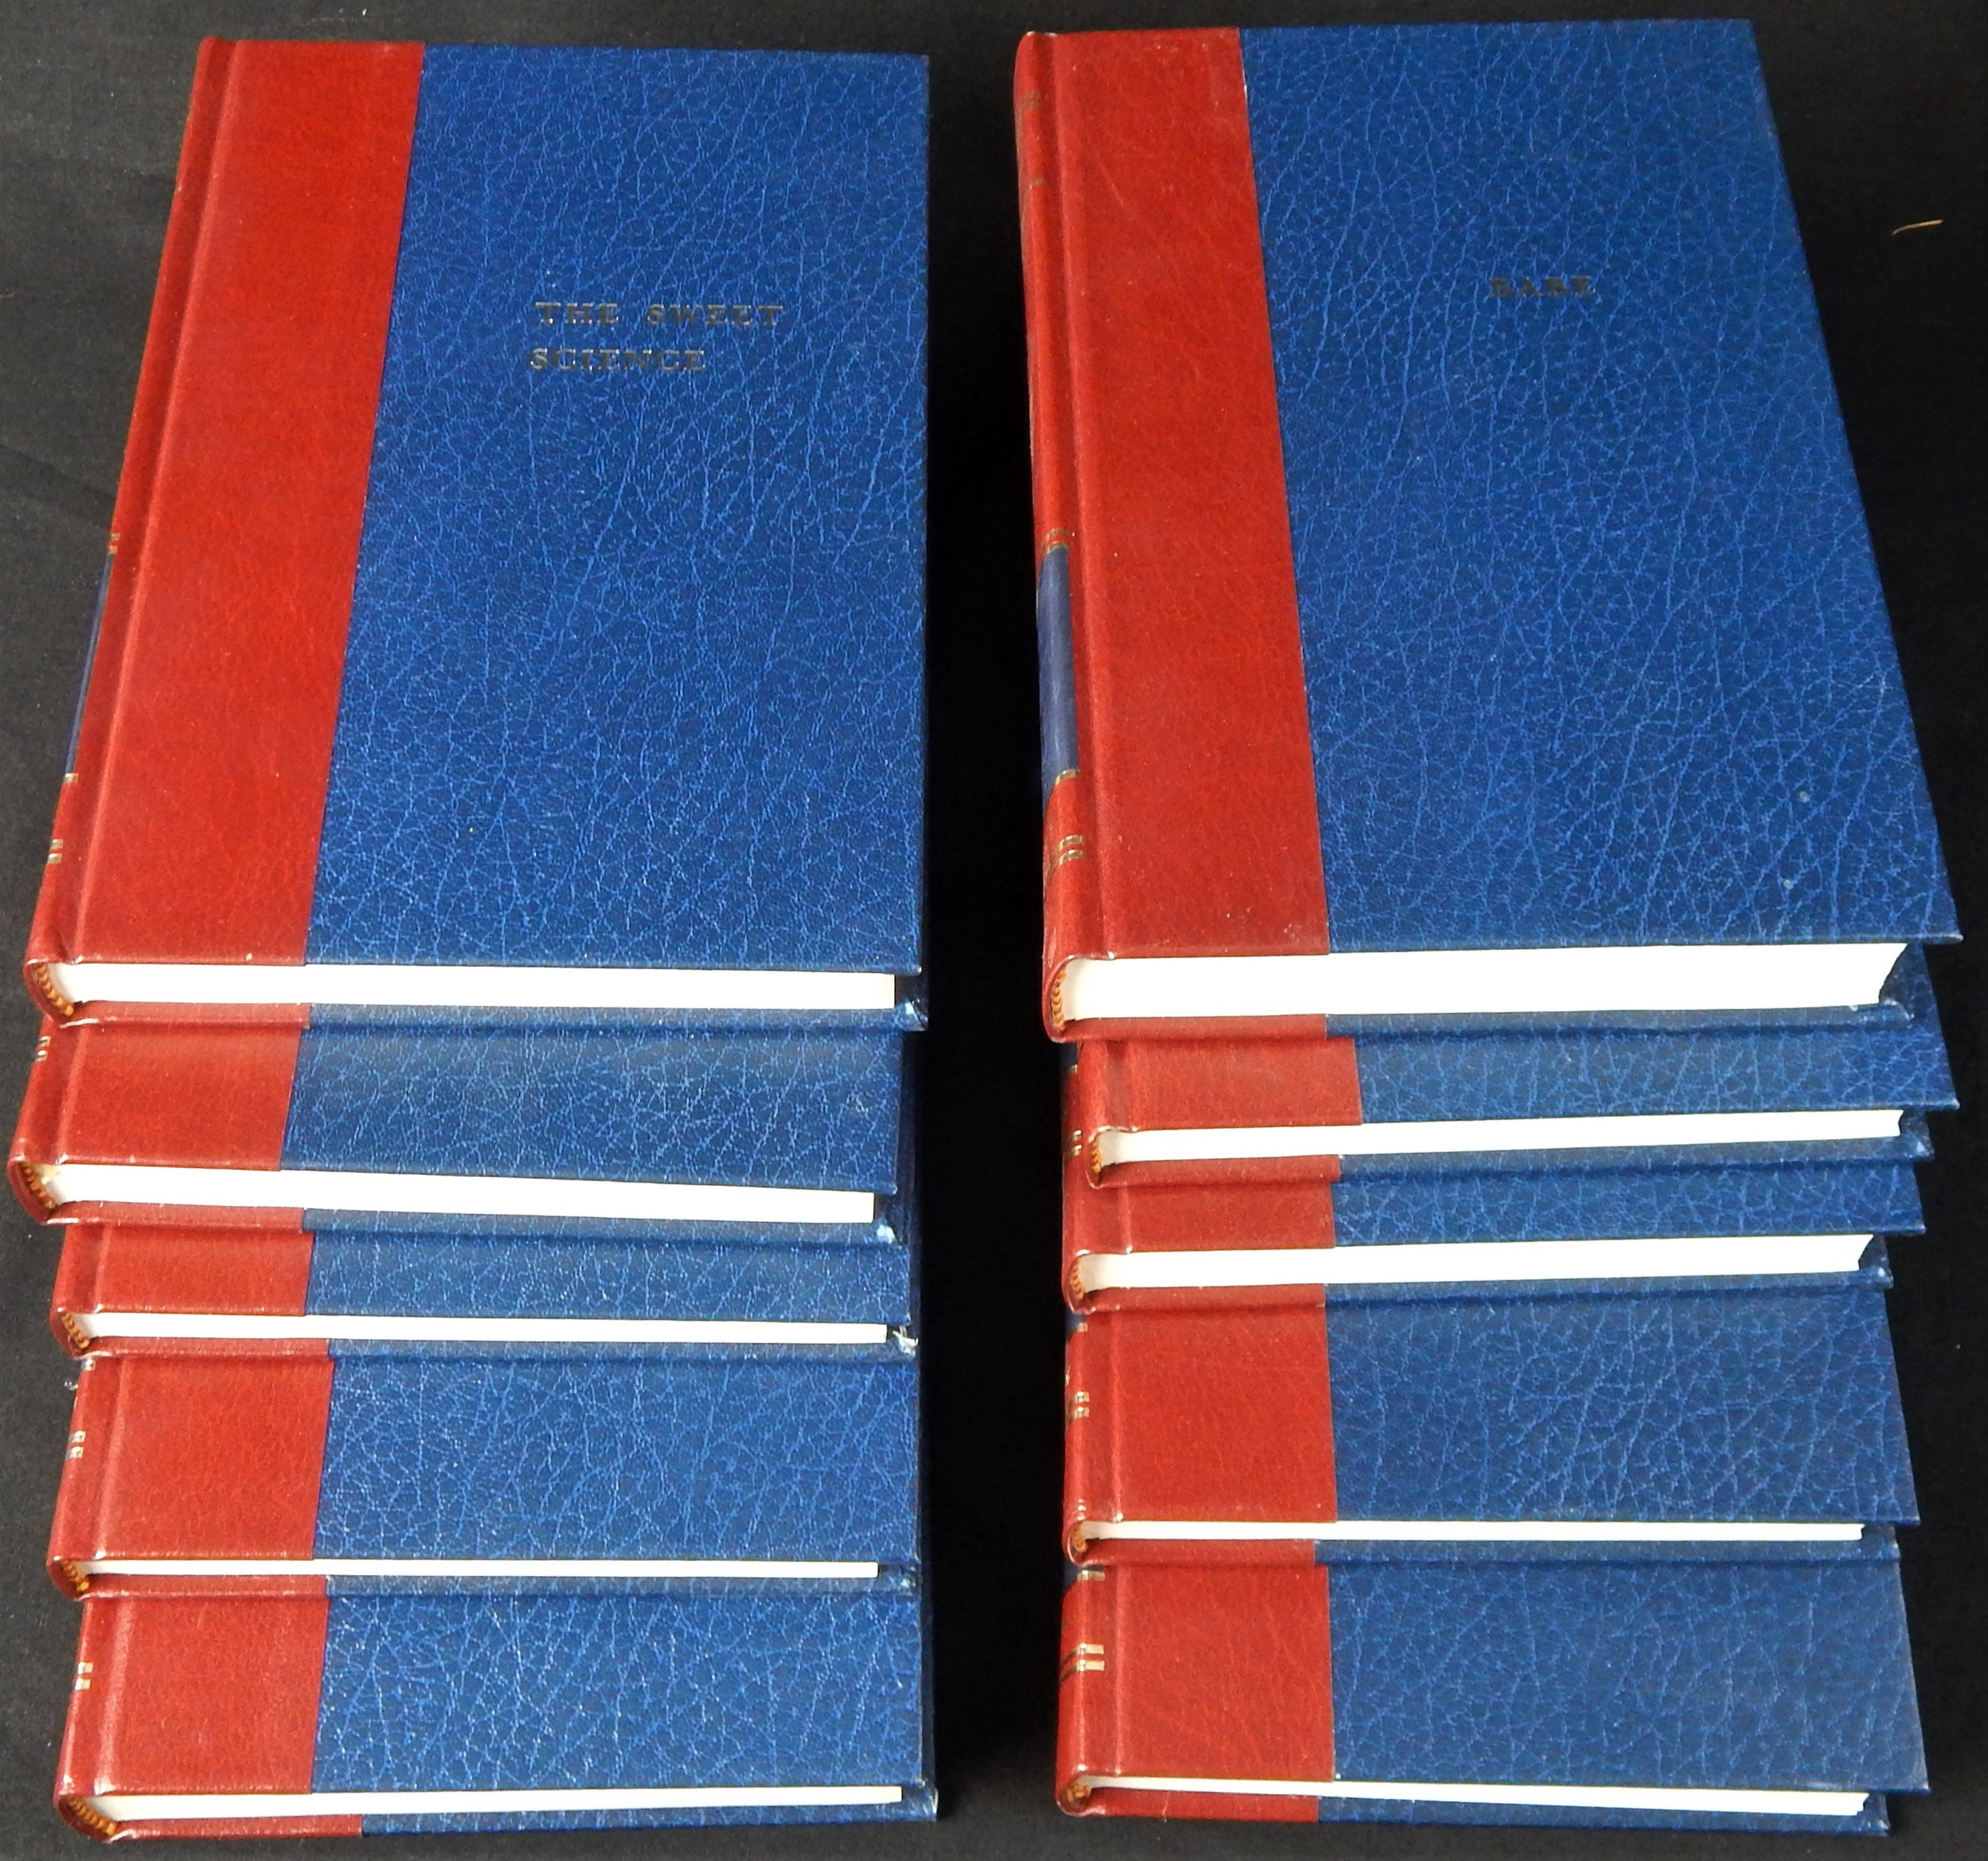 - 1980 "Sport Classics" Signed 10 Volume Book Set with BILL VEECK